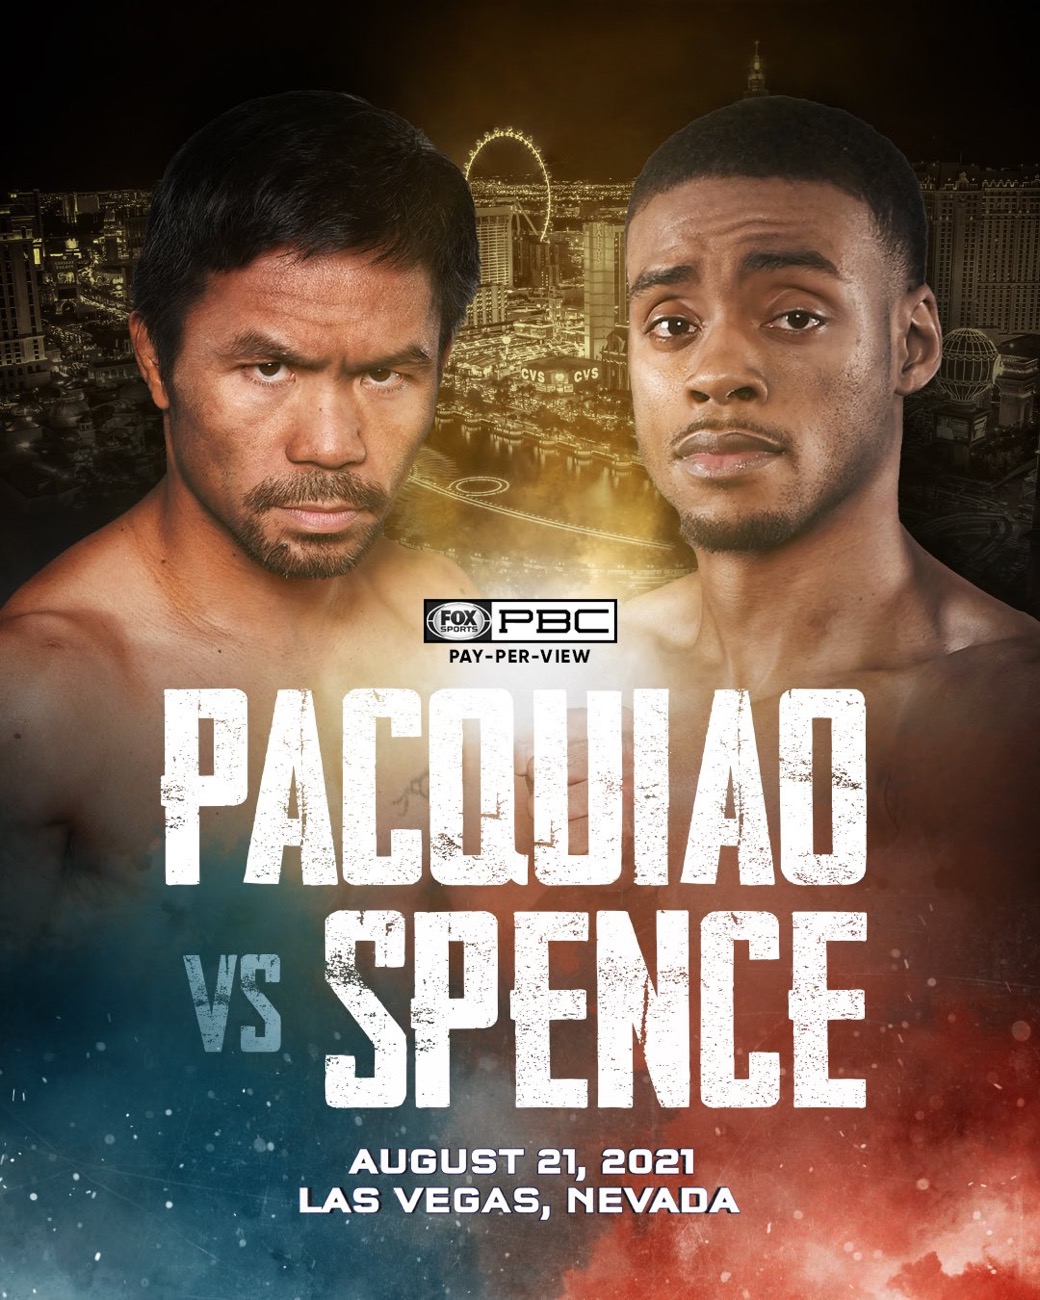 Errol Spence Jr., Jessie Vargas, Manny Pacquiao boxing image / photo